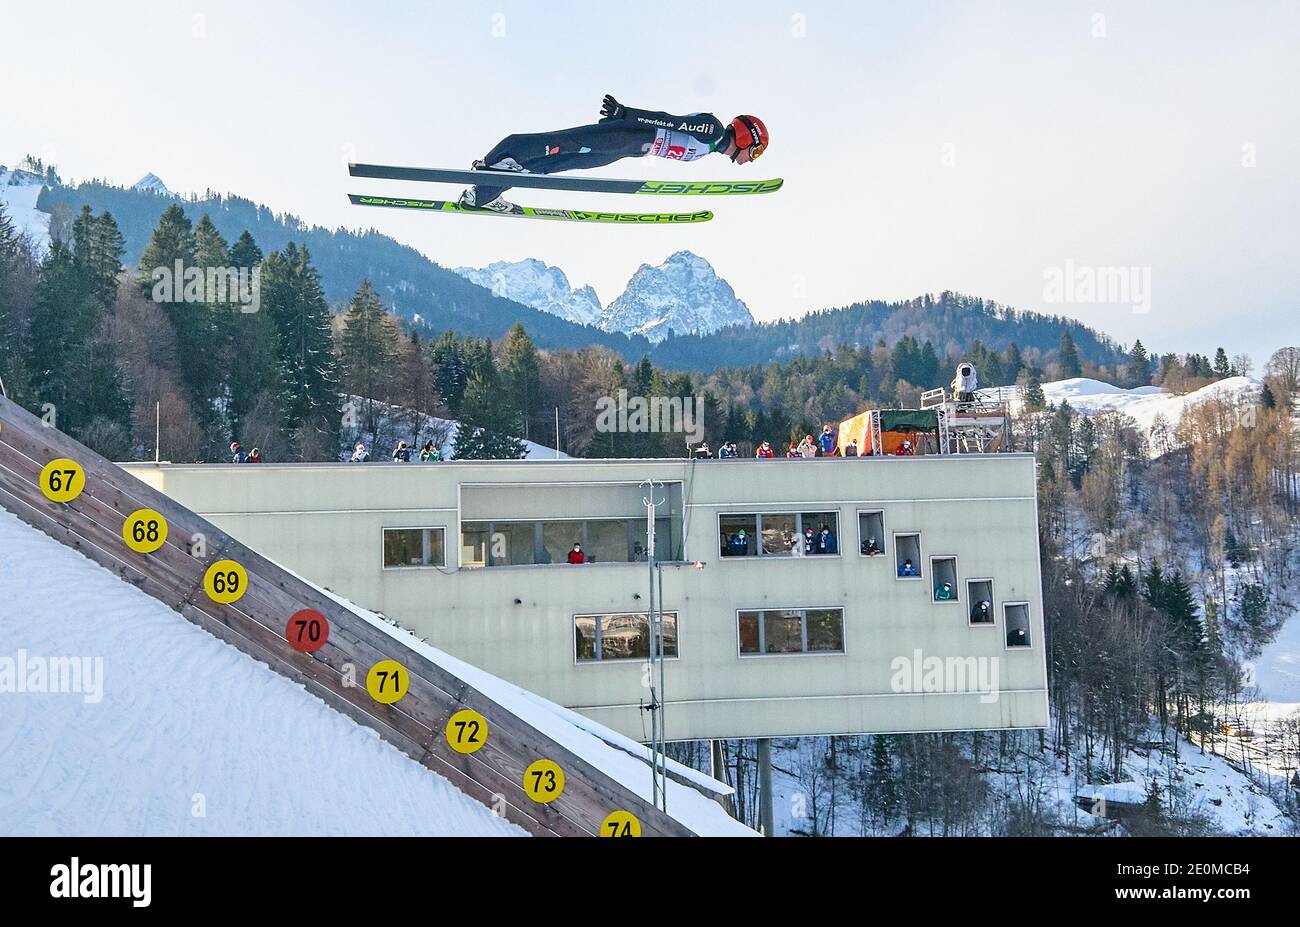 Richard FREITAG, GER in action  in front of Zugspitze mountain at the Four Hills Tournament Ski Jumping at Olympic Stadium, Grosse Olympiaschanze in Garmisch-Partenkirchen, Bavaria, Germany, January 01, 2021.  © Peter Schatz / Alamy Live News Stock Photo